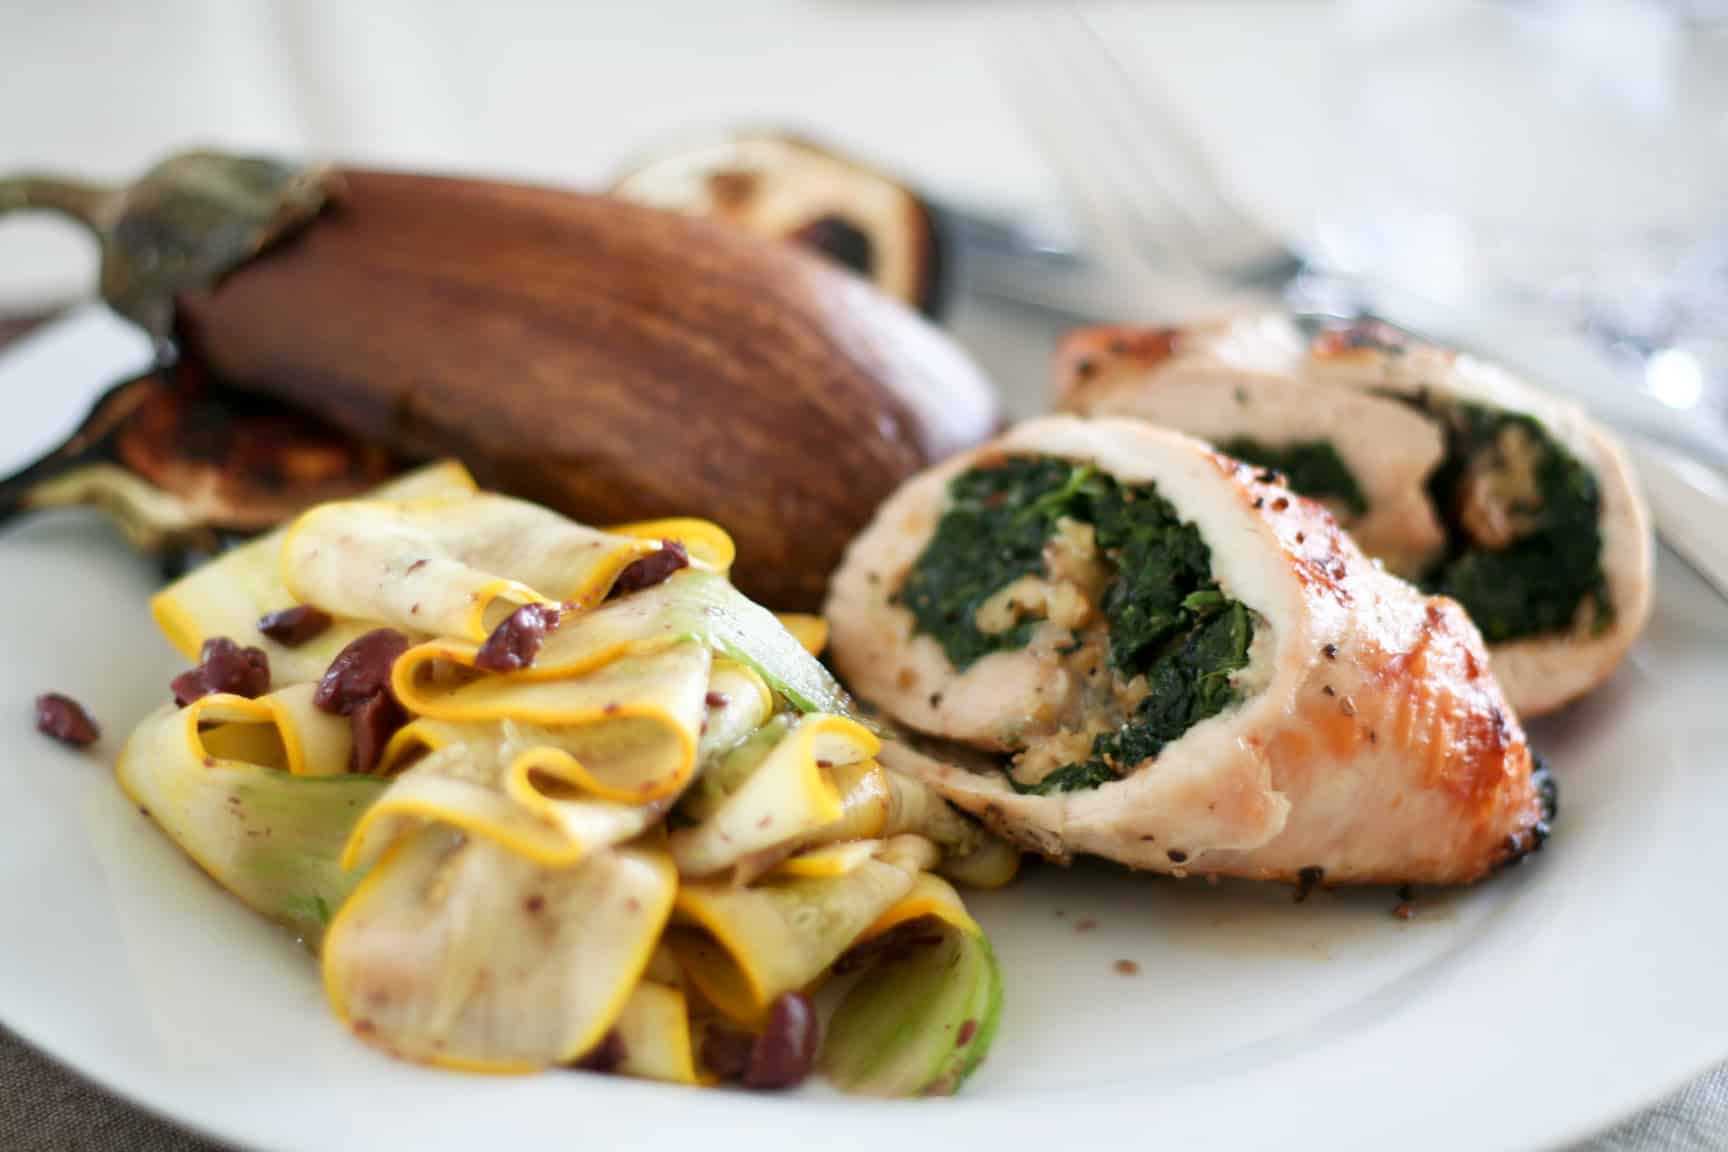 Chicken Spinach Roulade | by Sonia! The Healthy Foodie